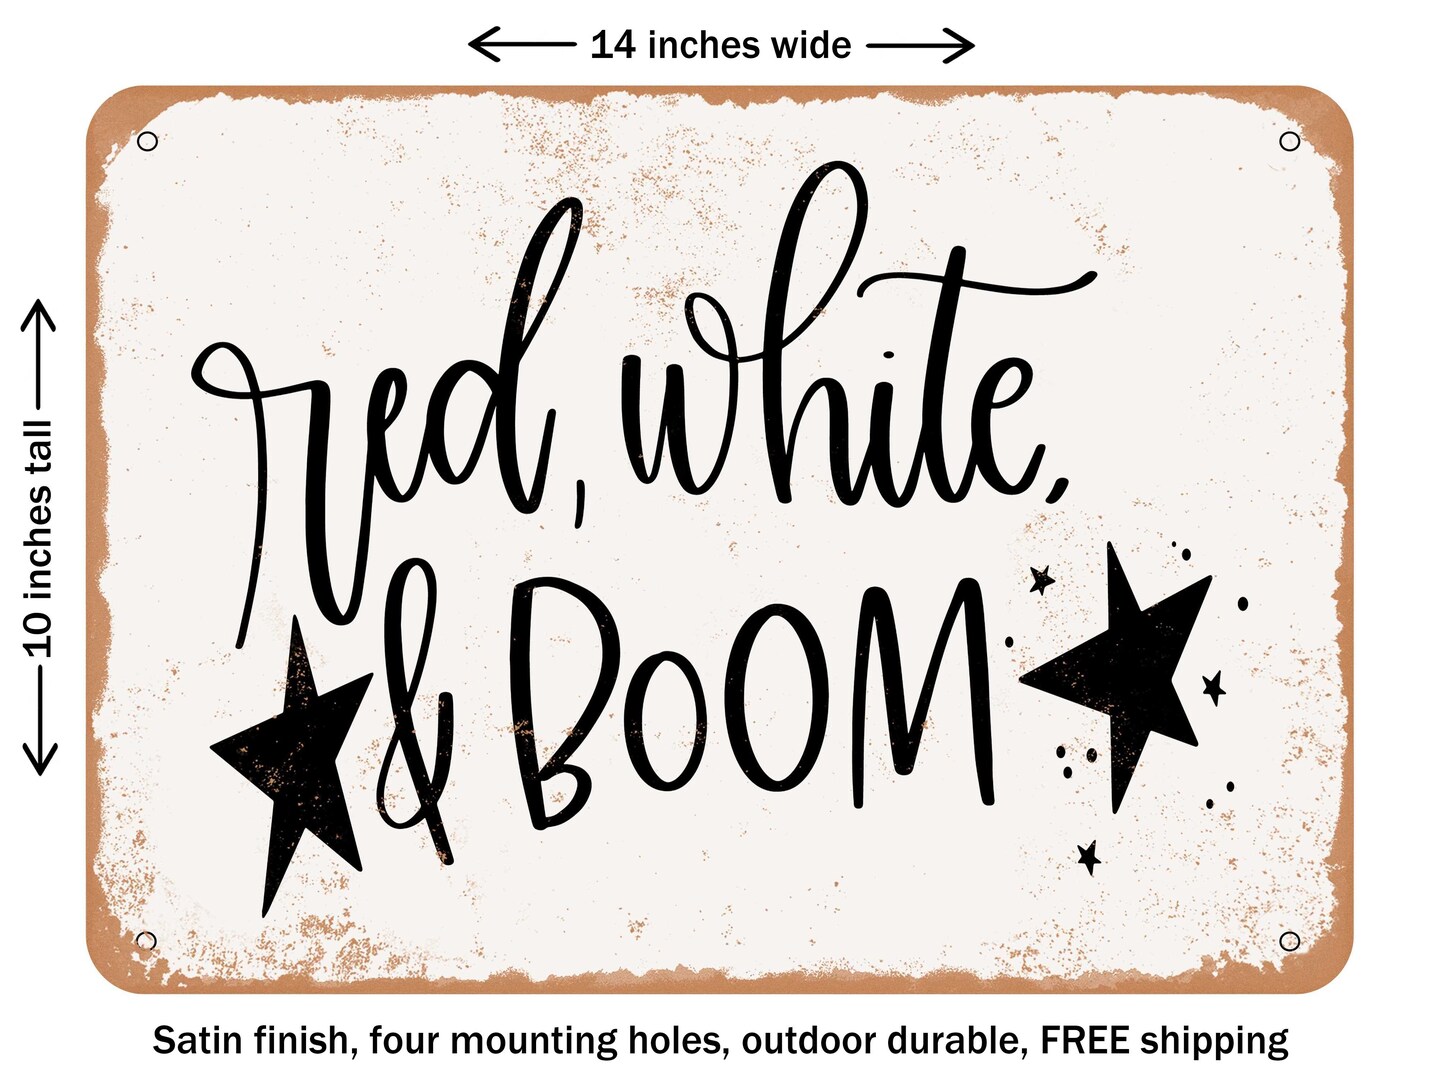 DECORATIVE METAL SIGN - Red White and Boom - Vintage Rusty Look